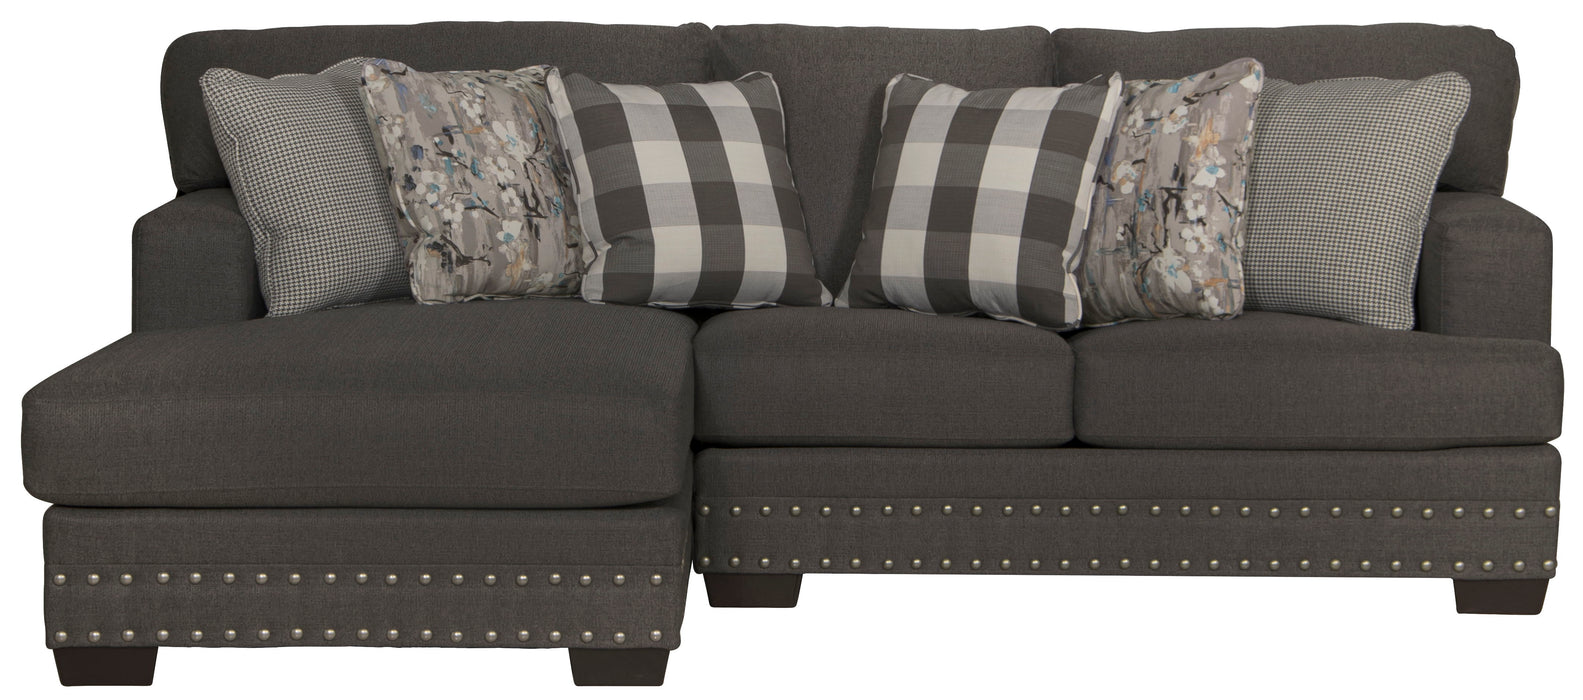 Crawford - 2 Piece Sofa Chaise With LSF Chaise With 6 Included Accent Pillows